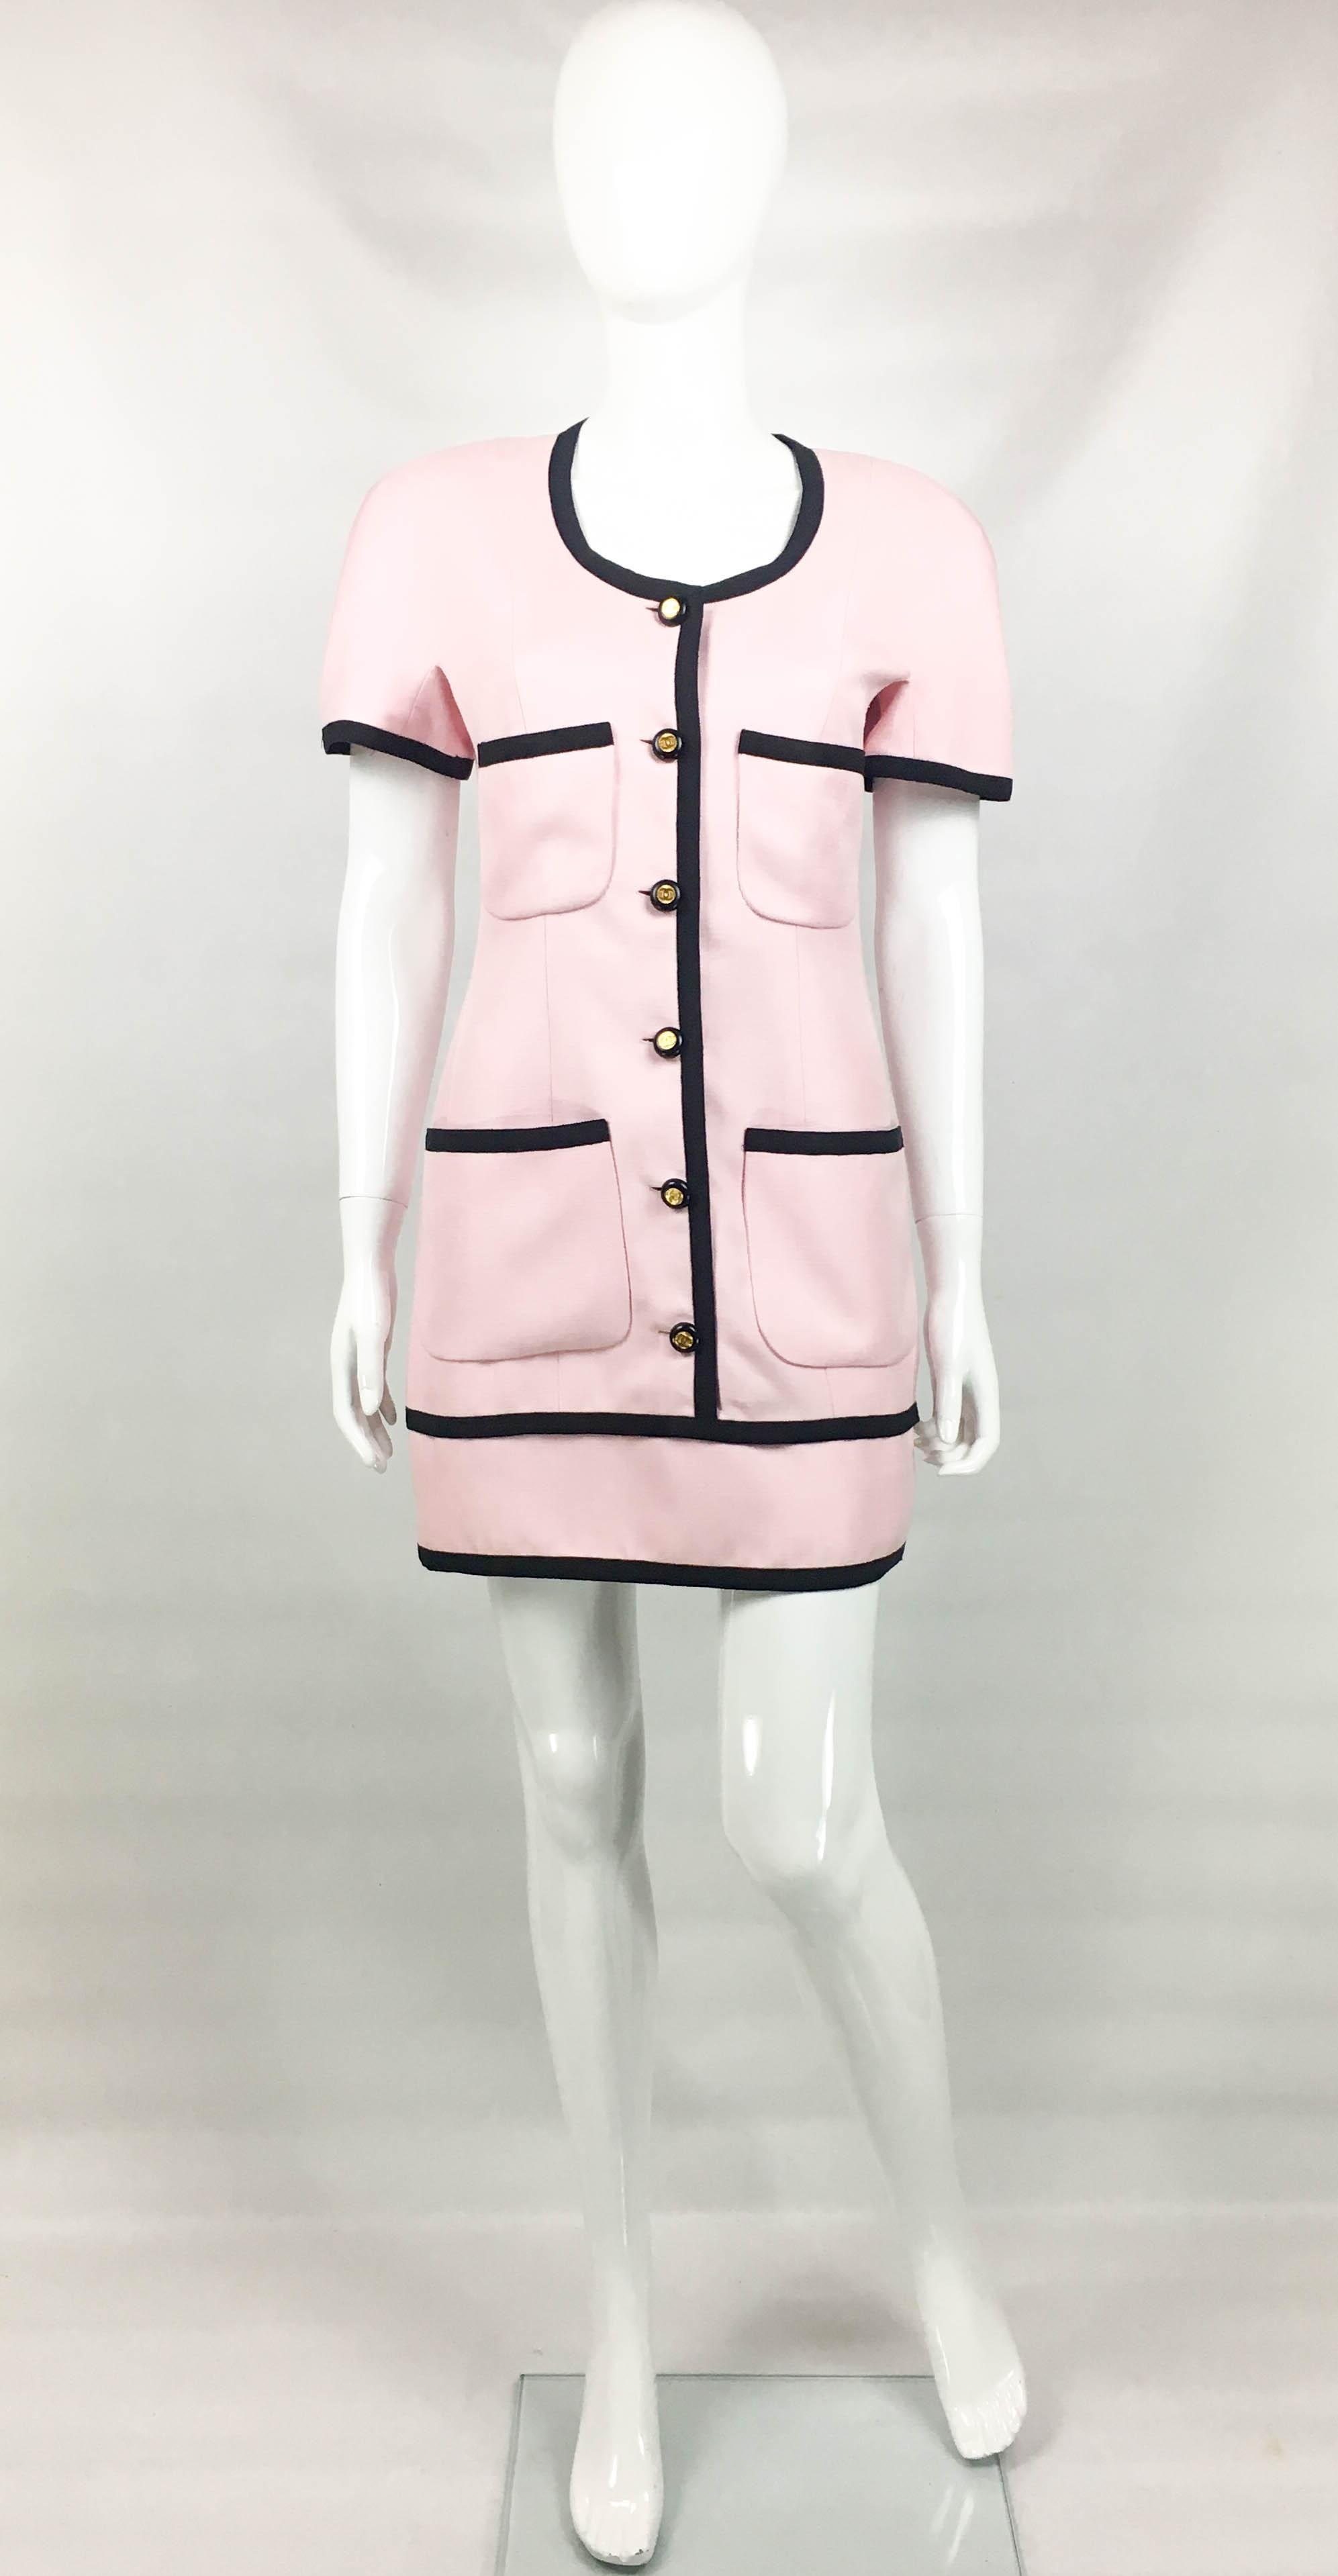 Vintage Chanel Pink Dress with Logo Buttons. This gorgeous short dress by Chanel dates back from 1991. Made in pink viscose, it has short sleeves, black edgings and black resin buttons with a gilt centre featuring the iconic ‘CC’ logo. There are 4